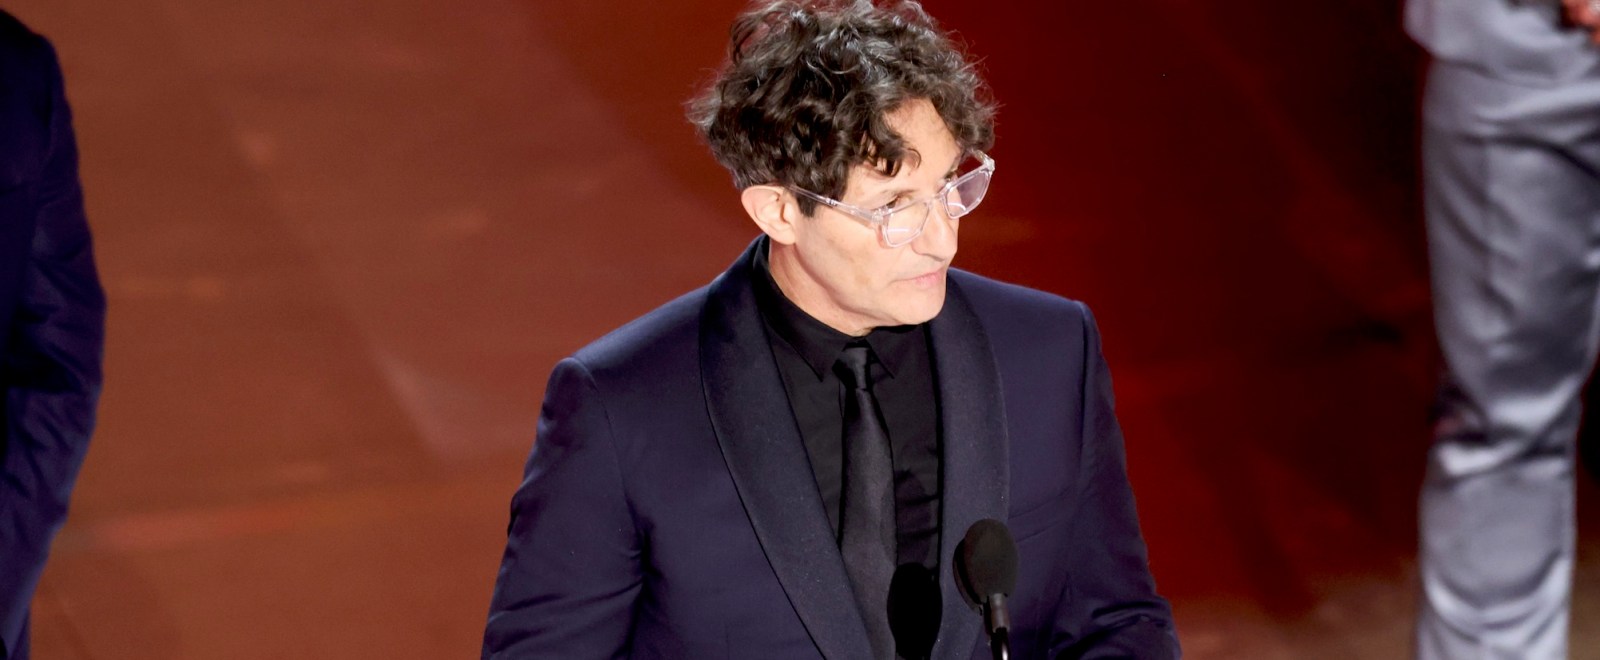 Here’s Why Jonathan Glazer’s Acceptance Speech Isn’t On The Oscars’ YouTube Channel